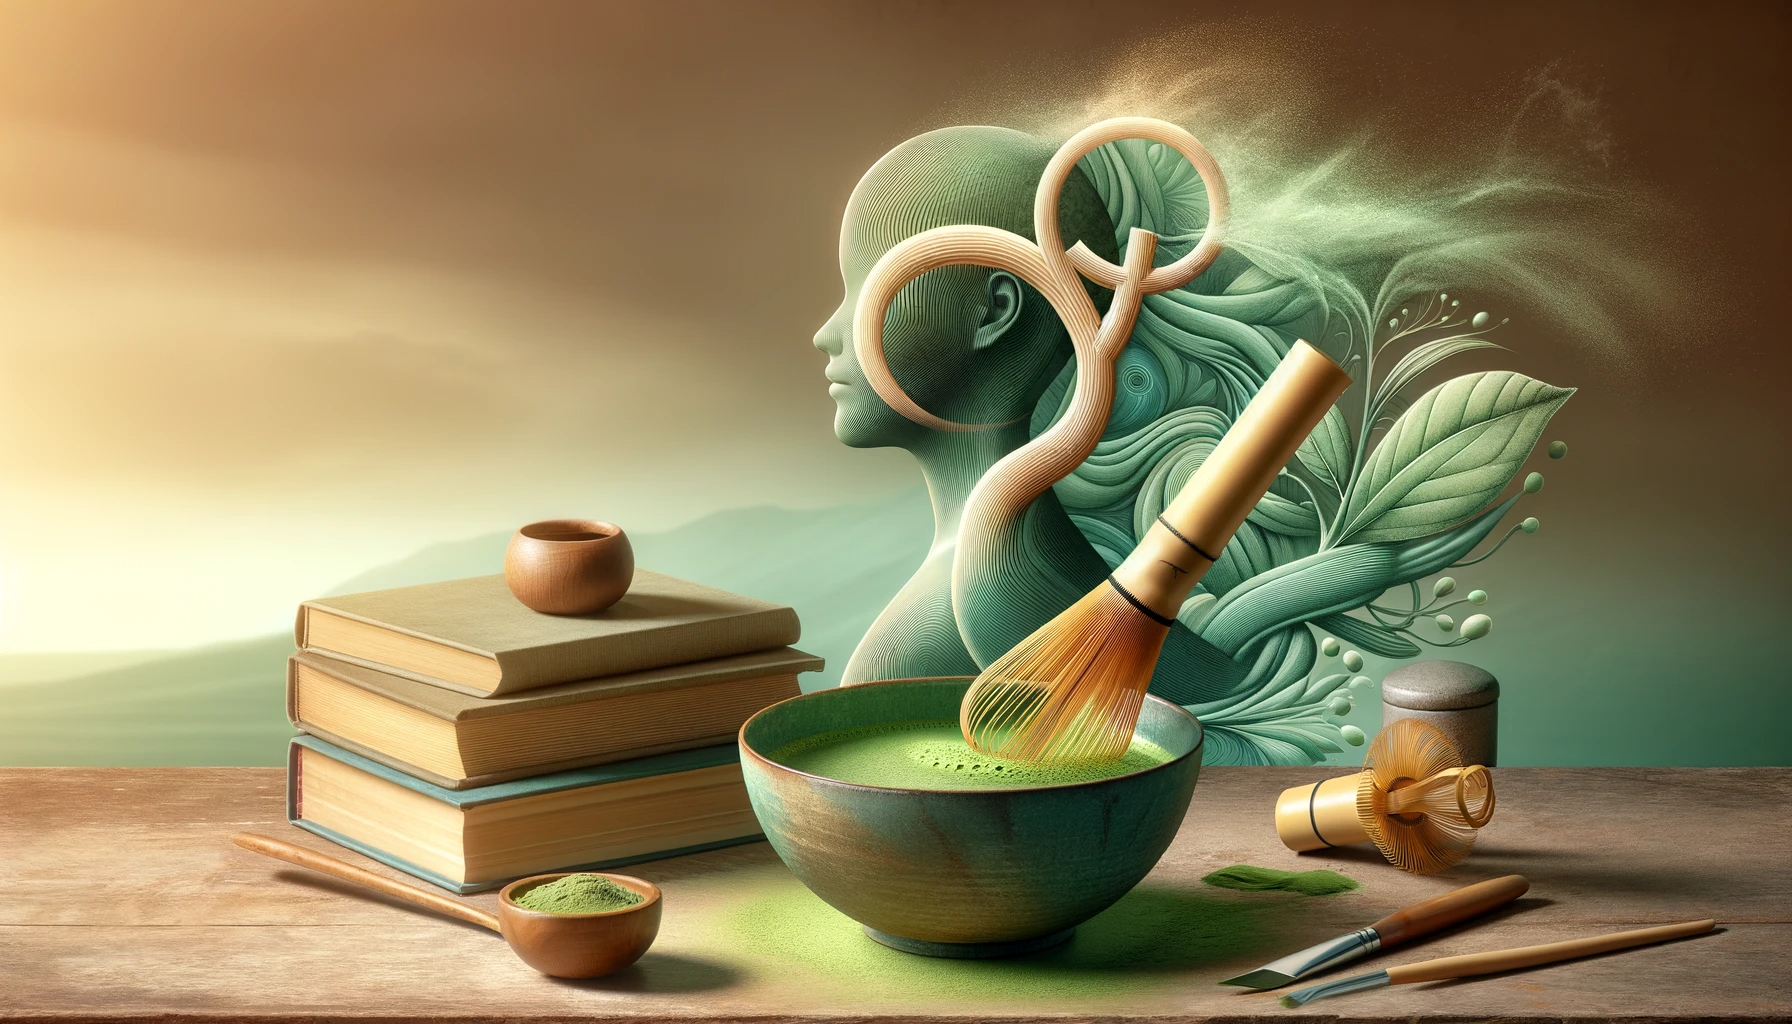 A photo-realistic image featuring a matcha tea bowl and symbols of fertility and health.